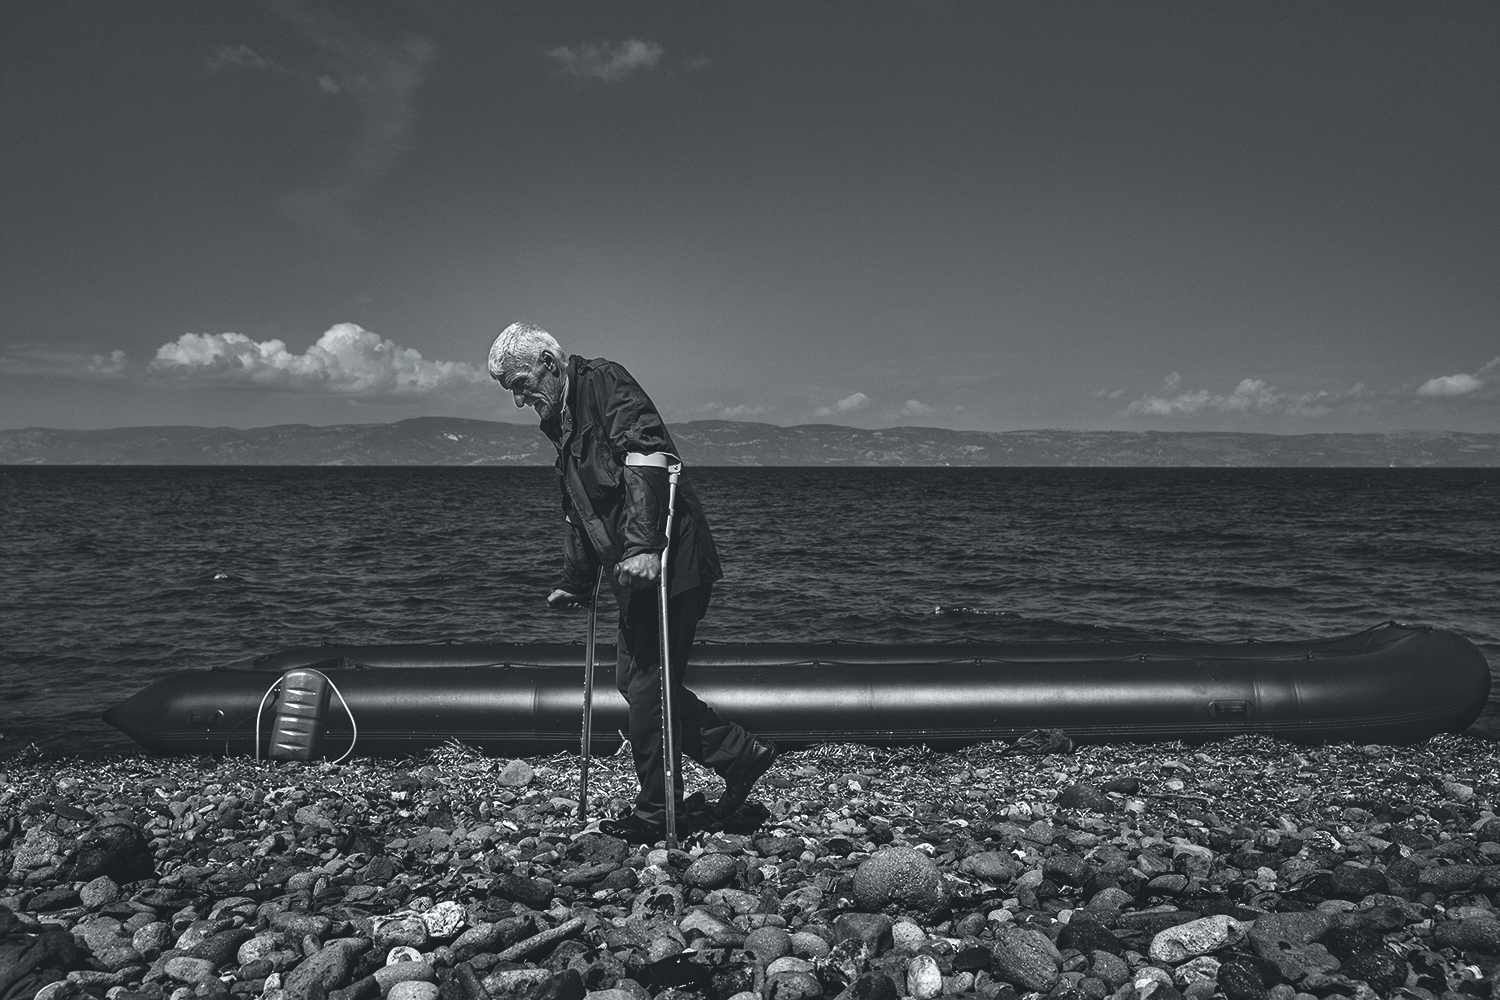 In Lesbos, one of the 2,000 migrants who arrive in Greece daily (James Nachtwey for TIME)